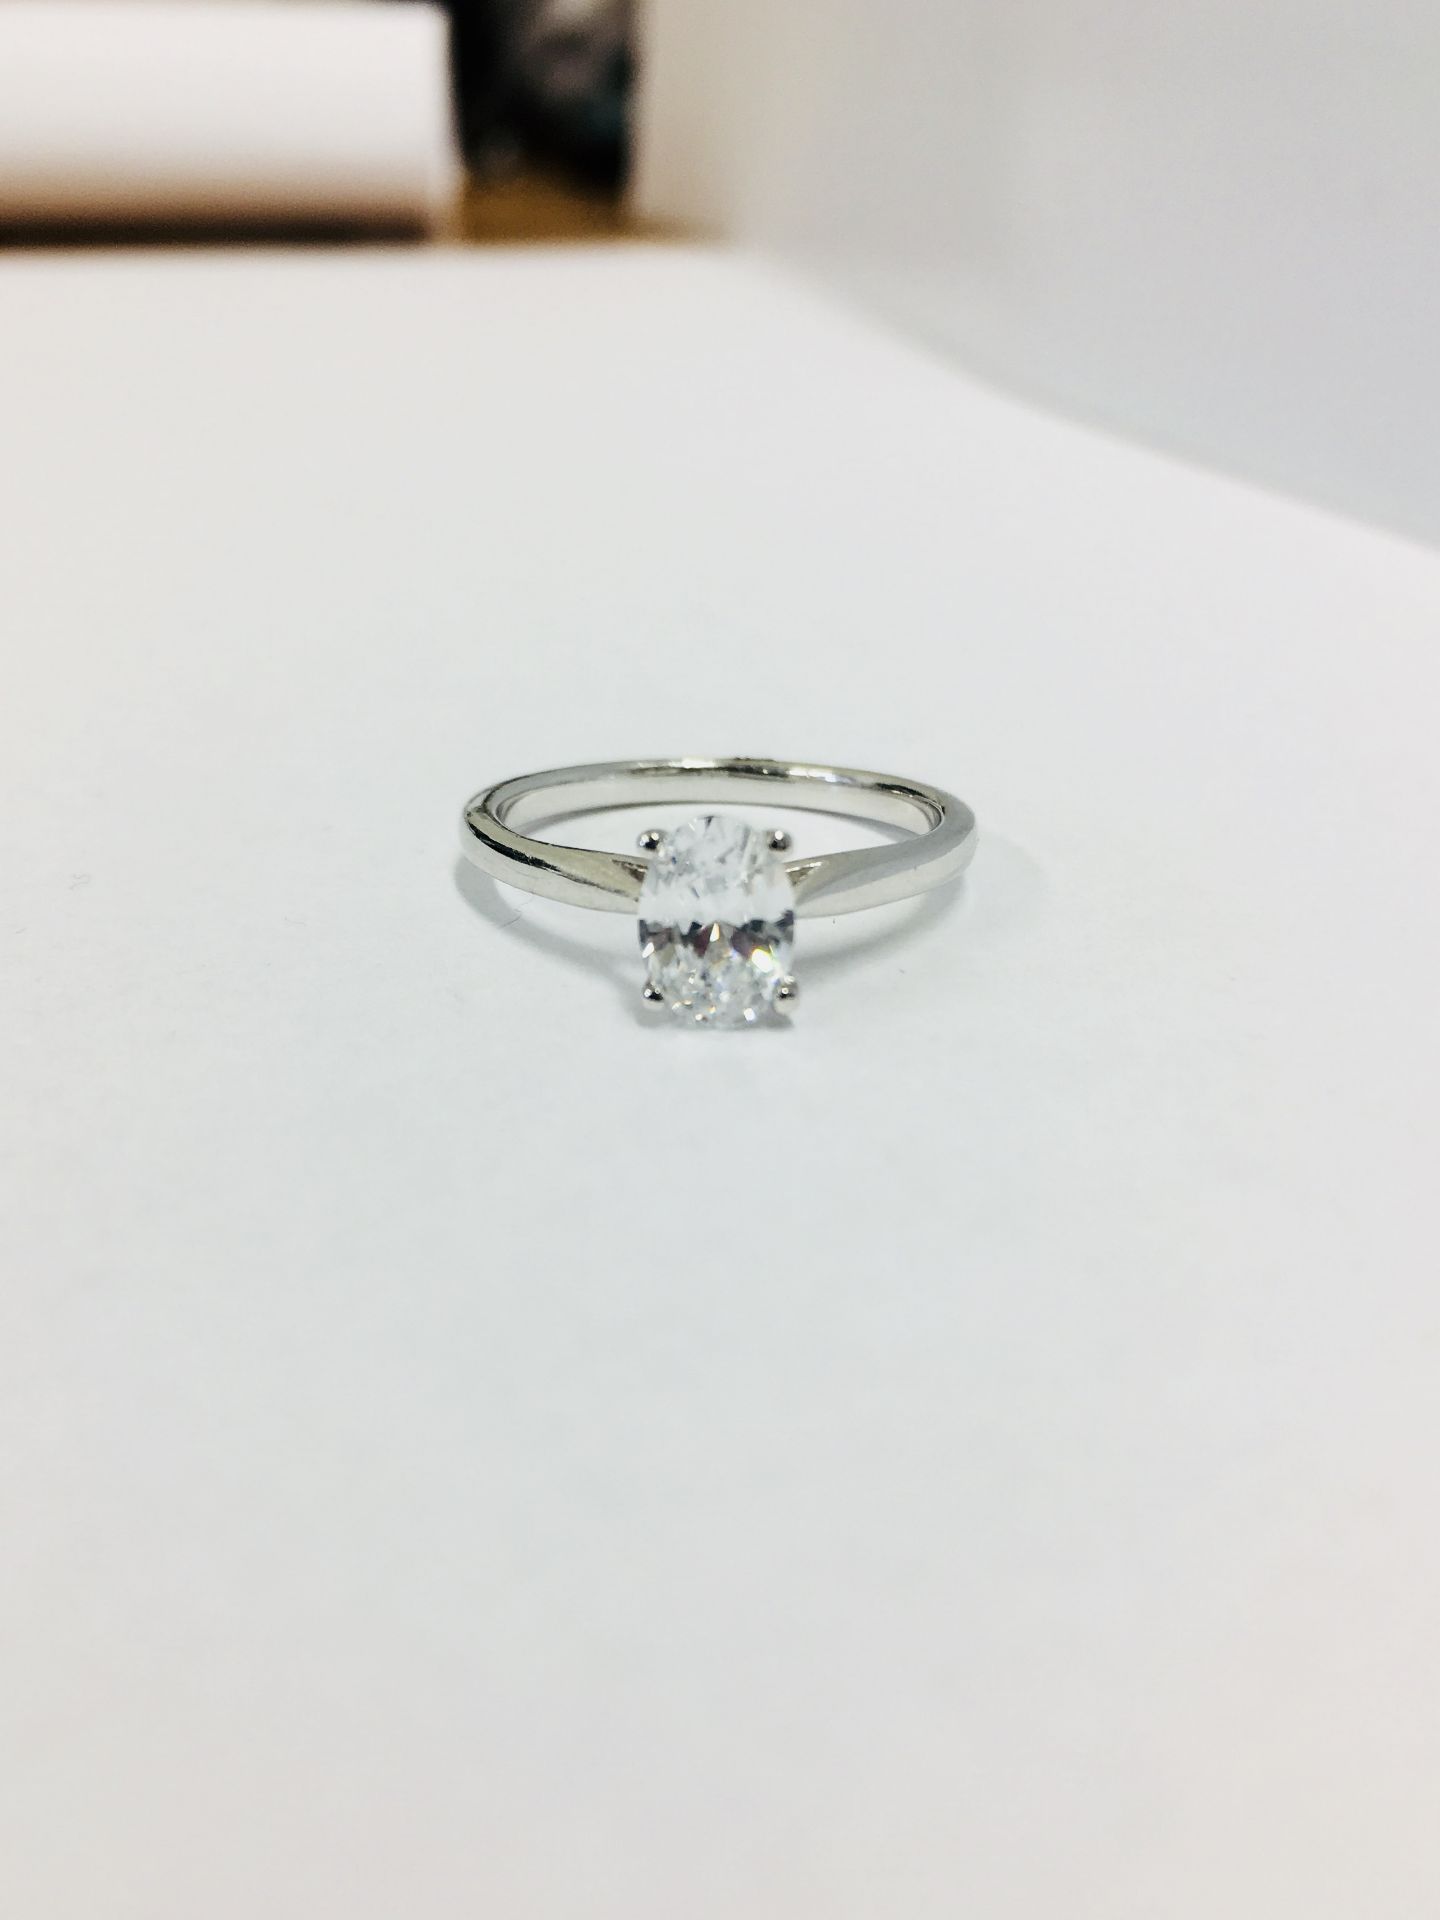 Platinum oval diamond solitaire ring.0.30ct oval diamond si clarity i colour,2.9gms platinum setting - Image 5 of 5